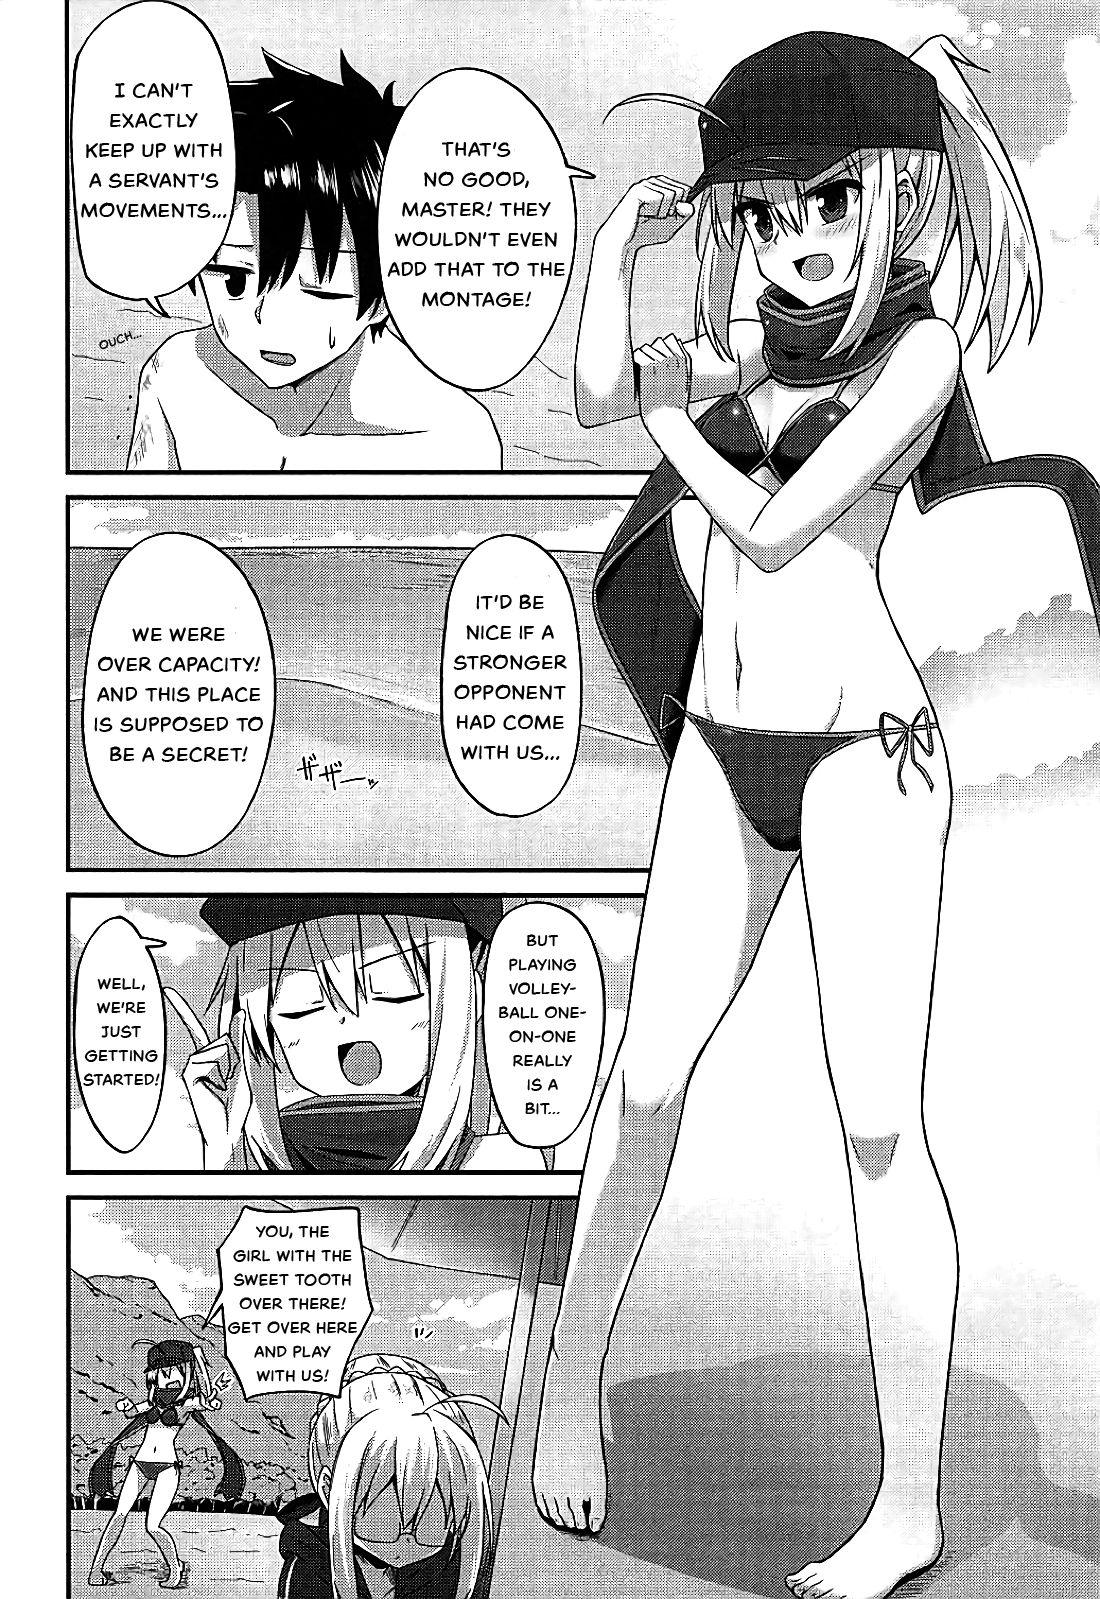 1080p Summer Heroines - Fate grand order Rough Sex - Page 5